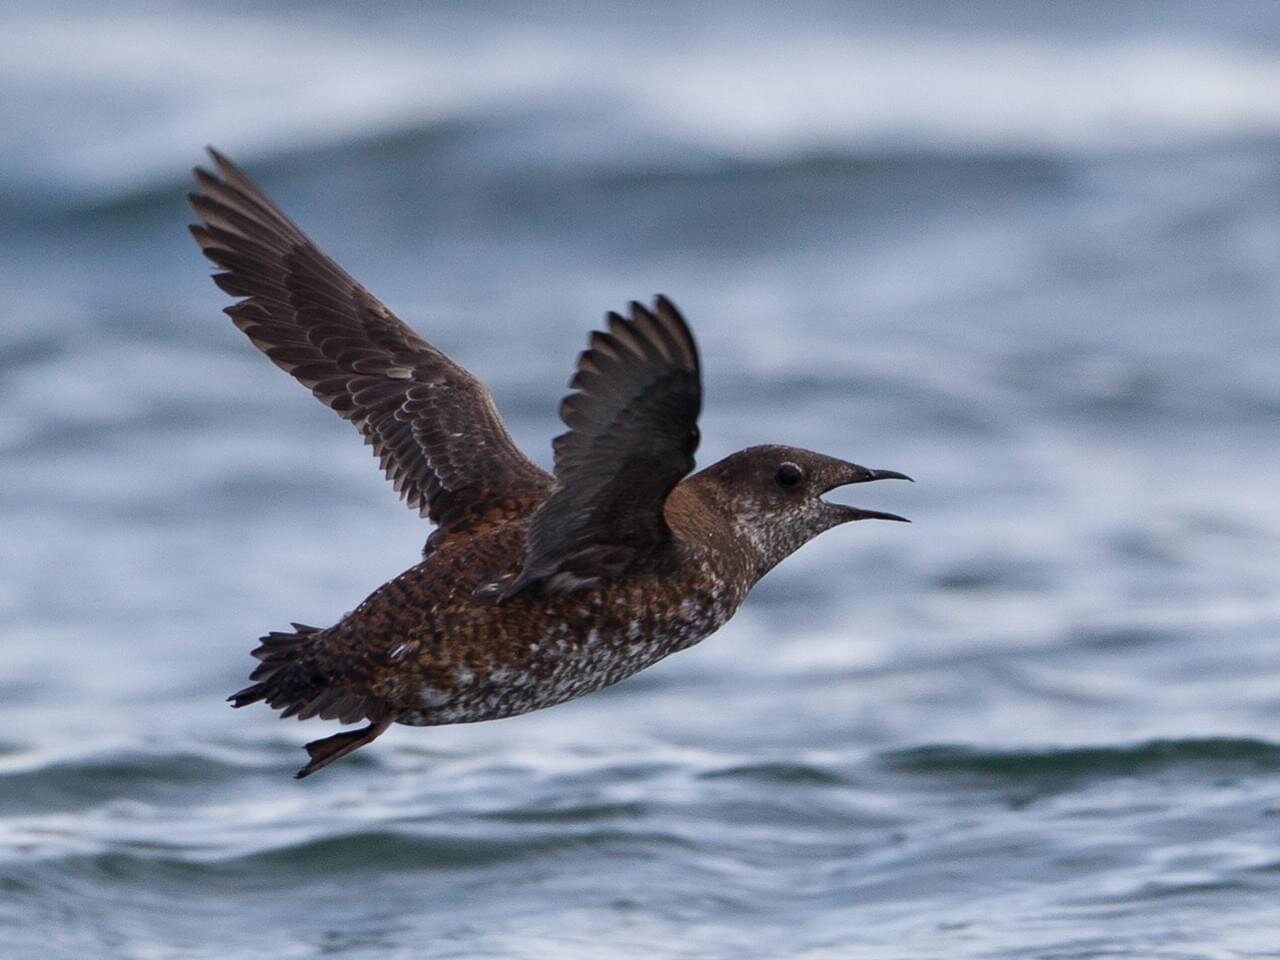 About the Marbled Murrelet